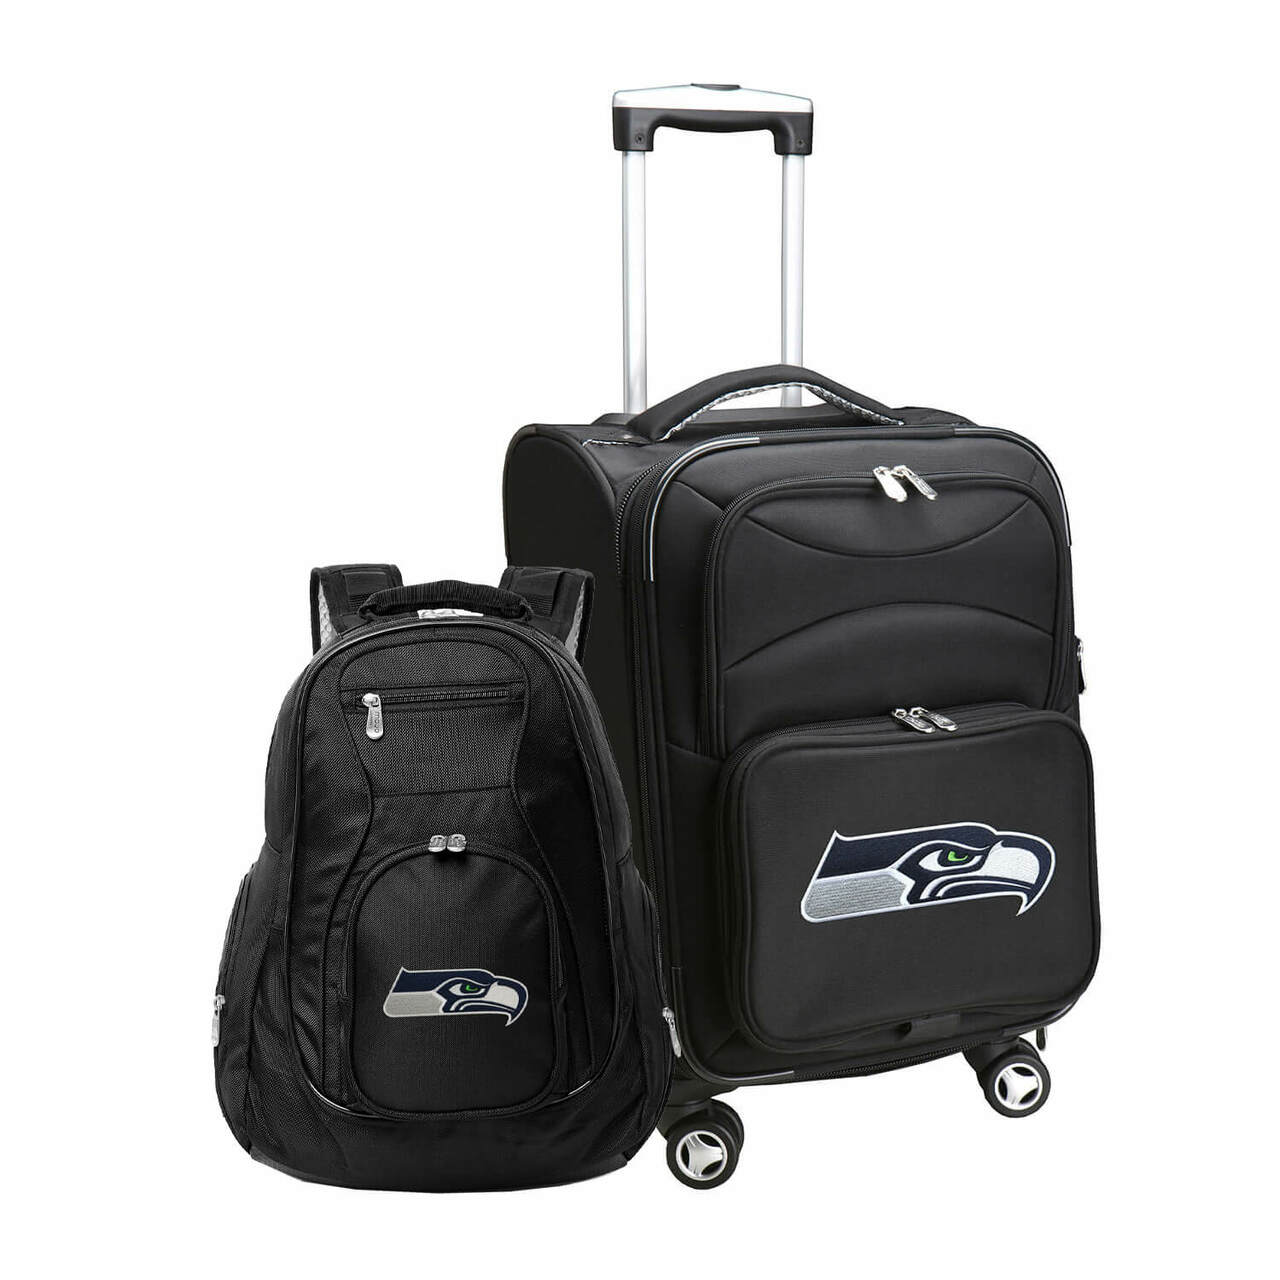 Seattle Seahawks Spinner Carry-On Luggage and Backpack Set